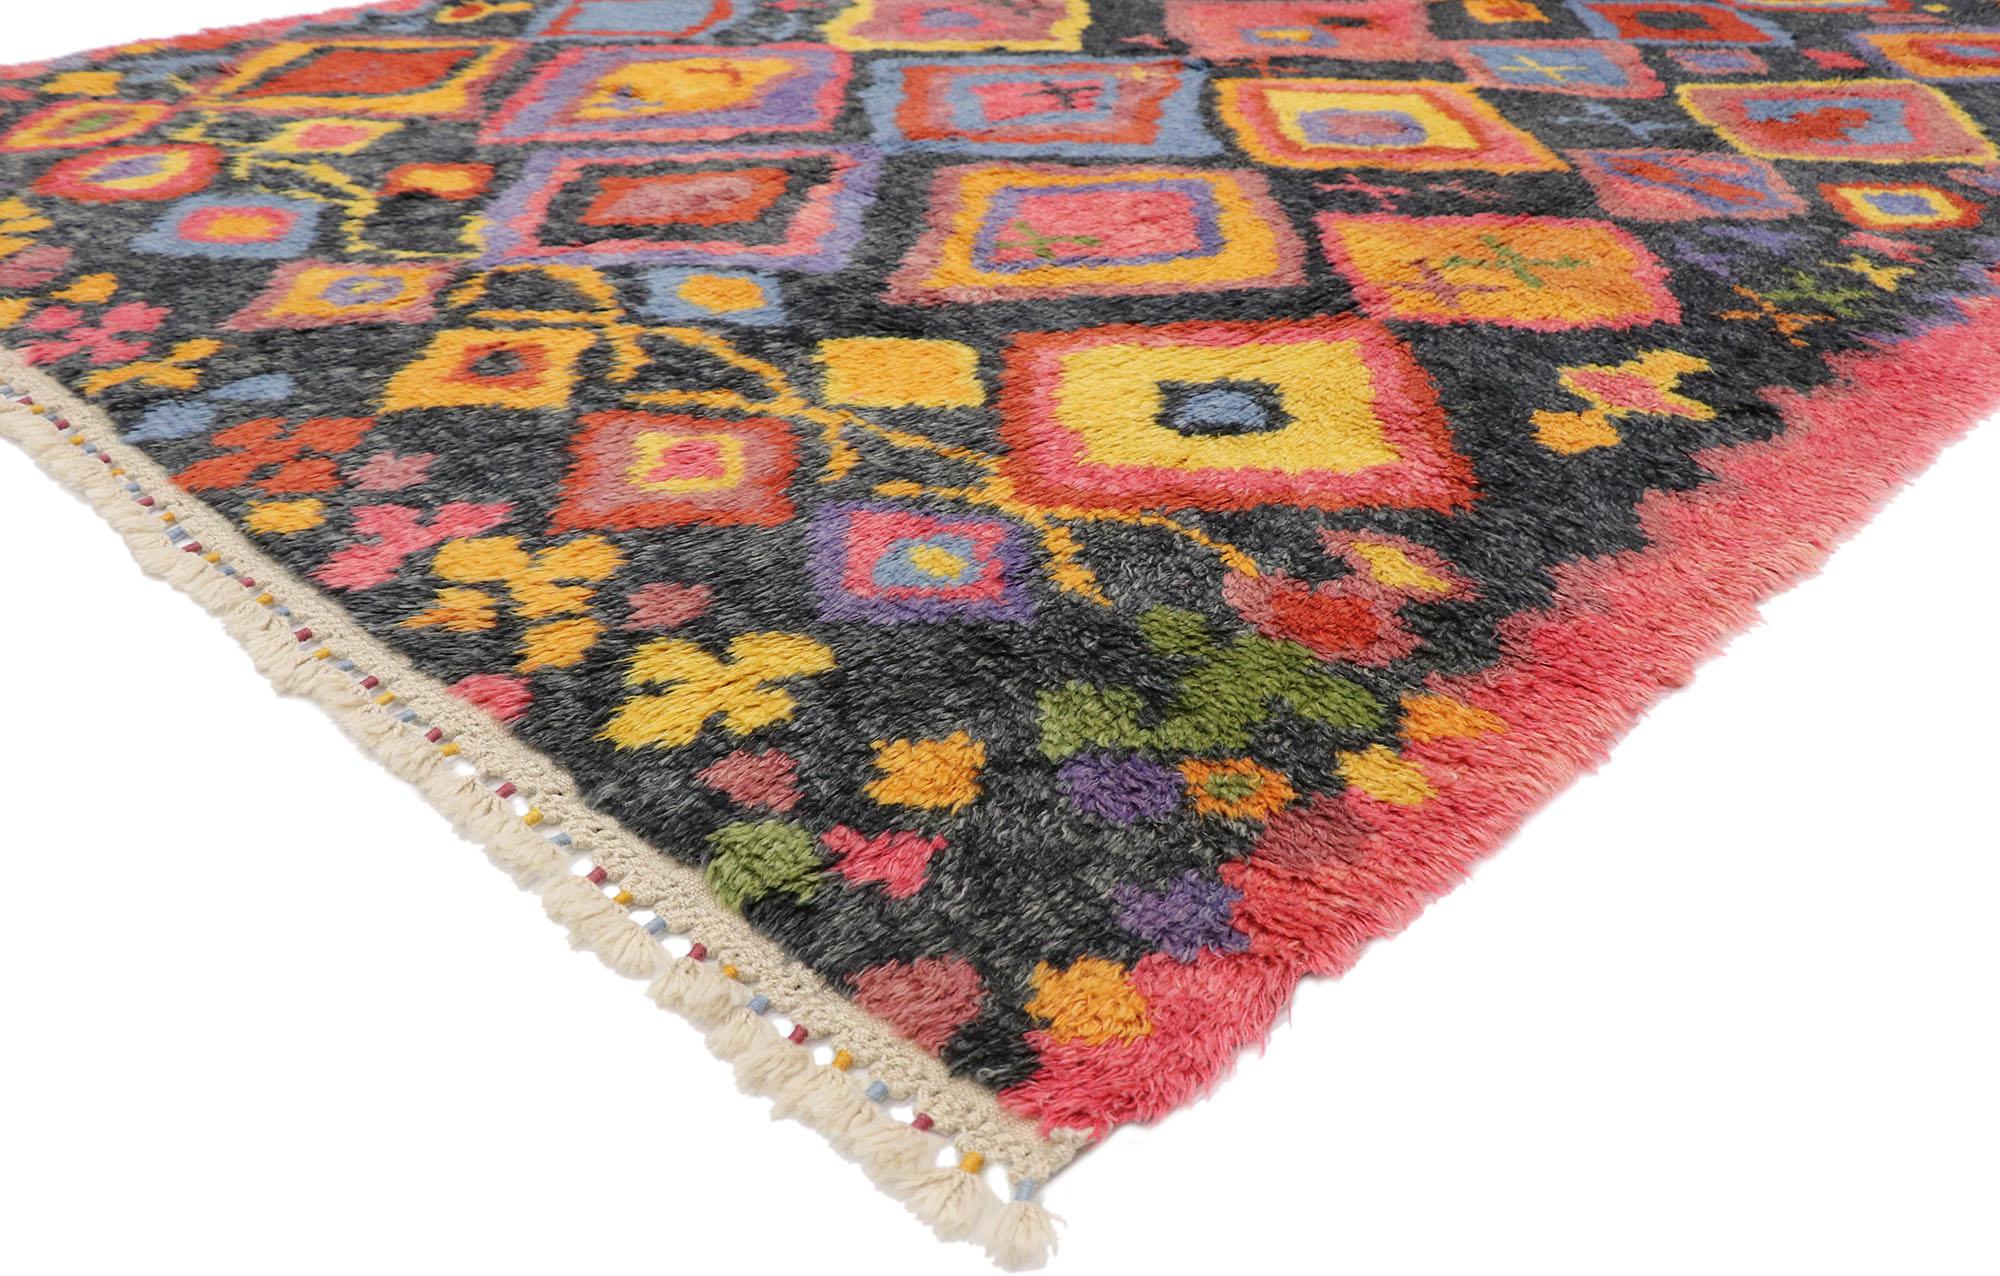 51874, new colorful contemporary Tulu Shag area rug with Tribal style. This hand knotted wool contemporary Tulu shag area rug with tribal style beautifully showcases Folk Art creativity. The composition is composed of an all-over lozenge pattern of